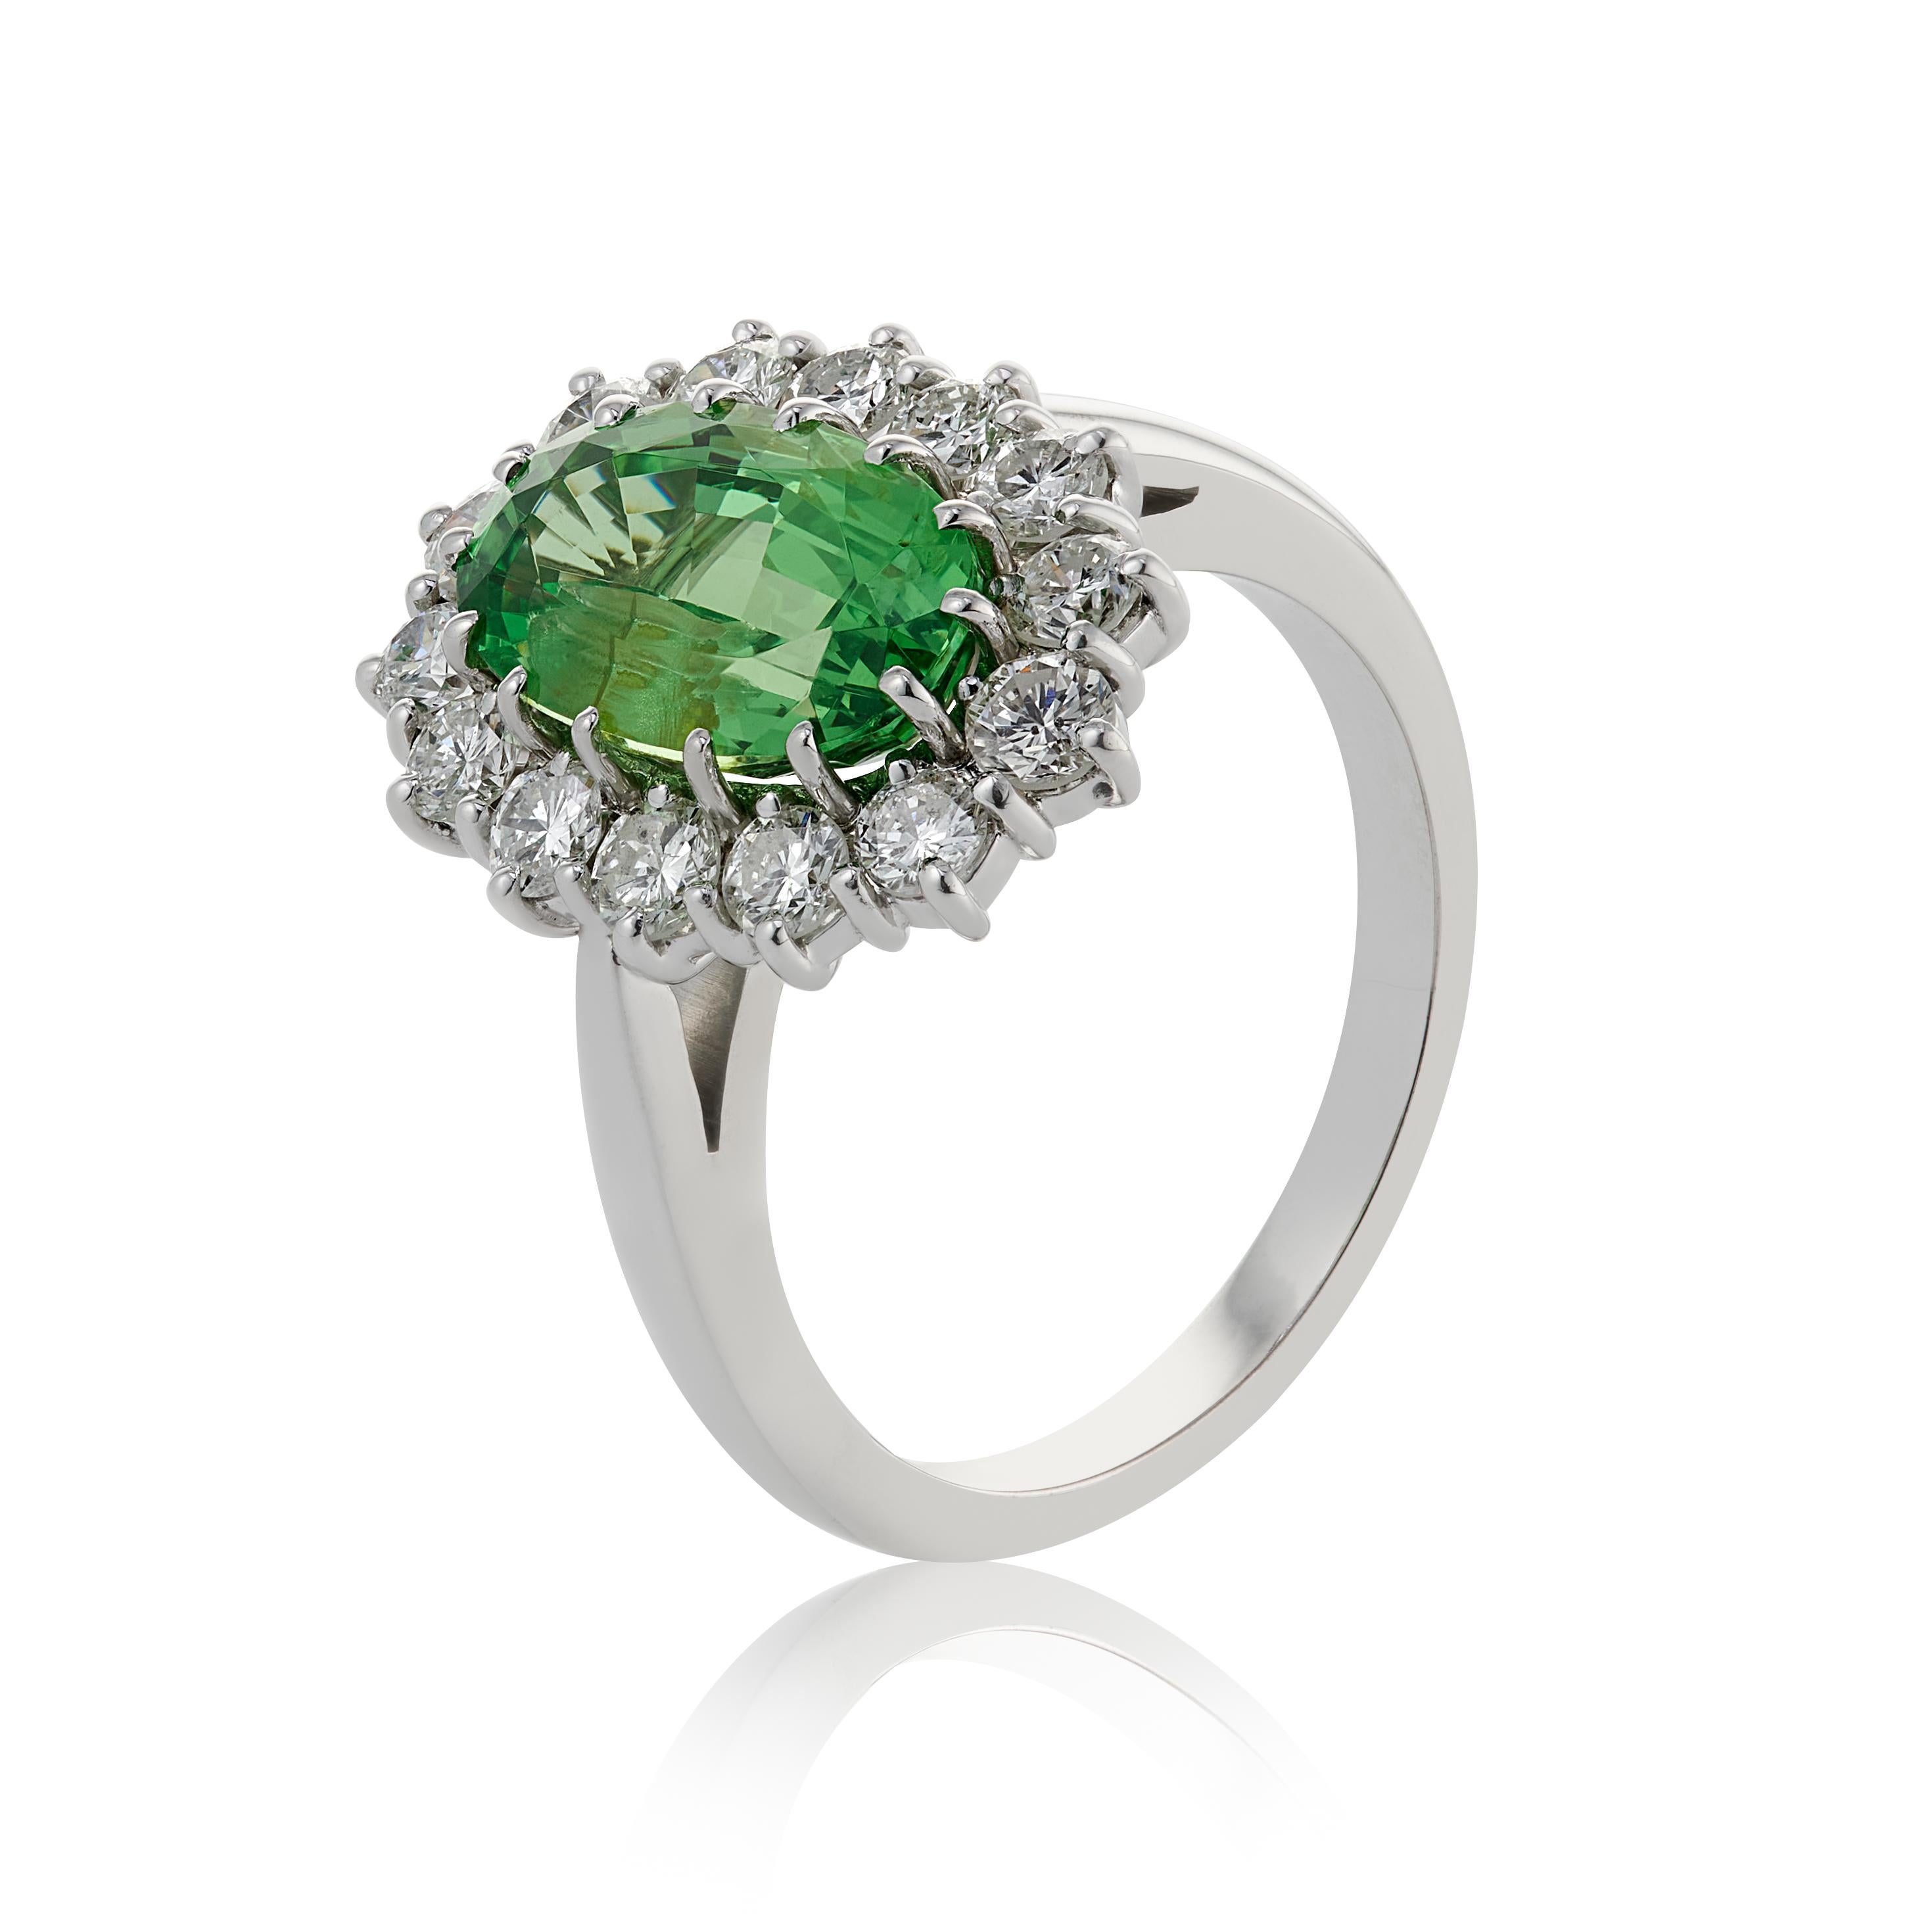 Contemporary E Wolfe& Co 3.08 Carat Tsavorite Garnet and Diamond 18ct White Gold Cluster Ring For Sale